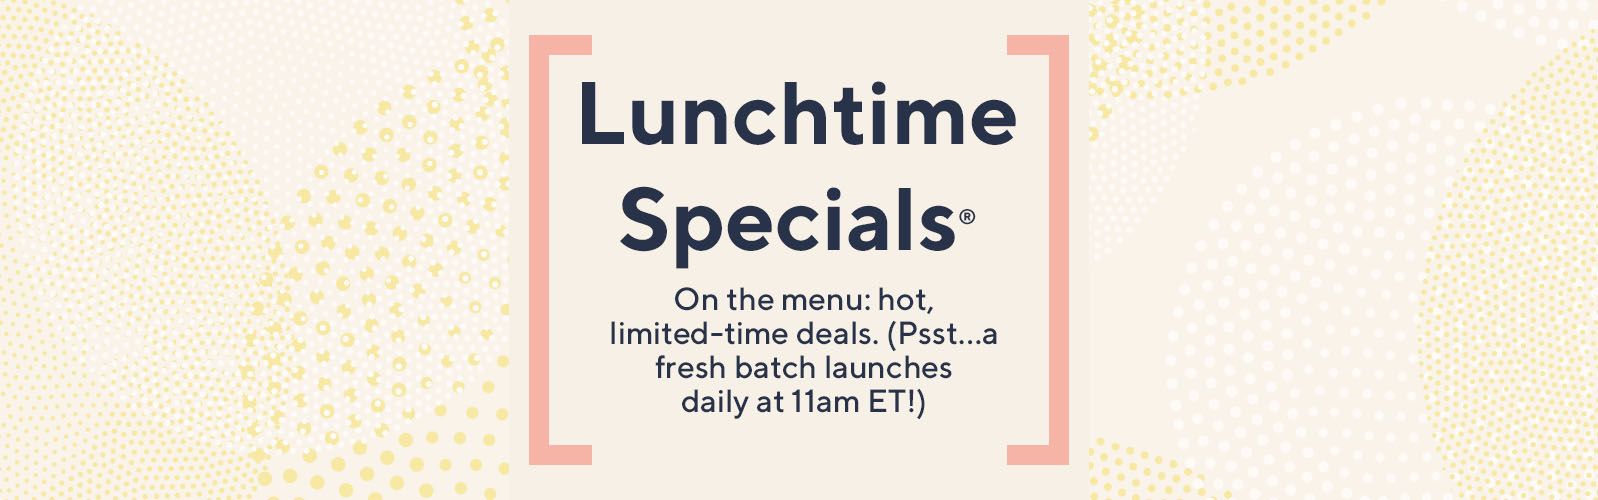 Lunchtime Specials: On the menu: hot, limited-time deals. (Psst…a fresh batch launches daily at 11am ET!)